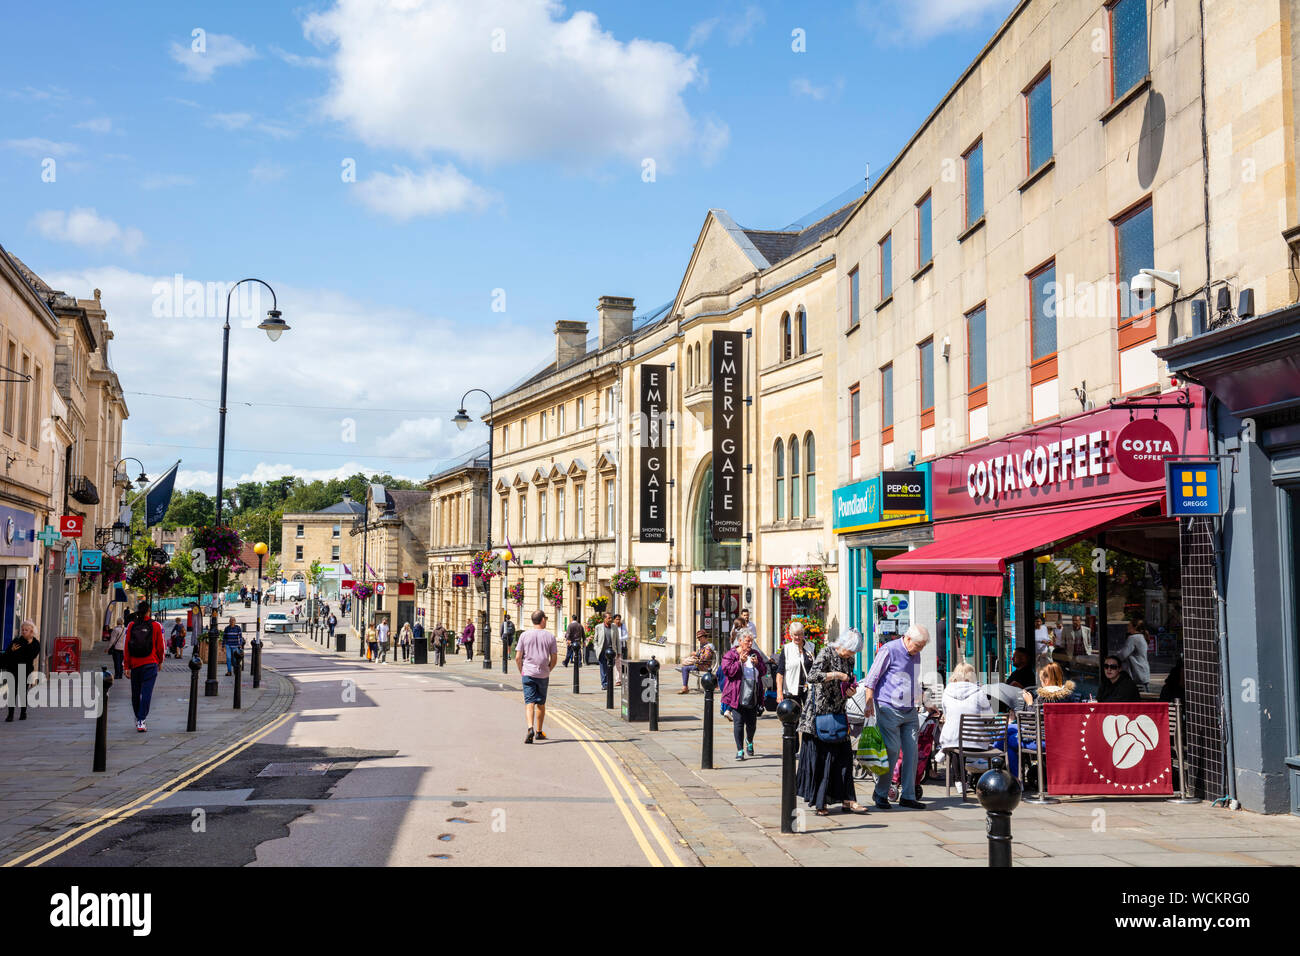 Chippenham High Street shops with people shopping Wiltshire England uk gb Europe High street UK high street Stock Photo